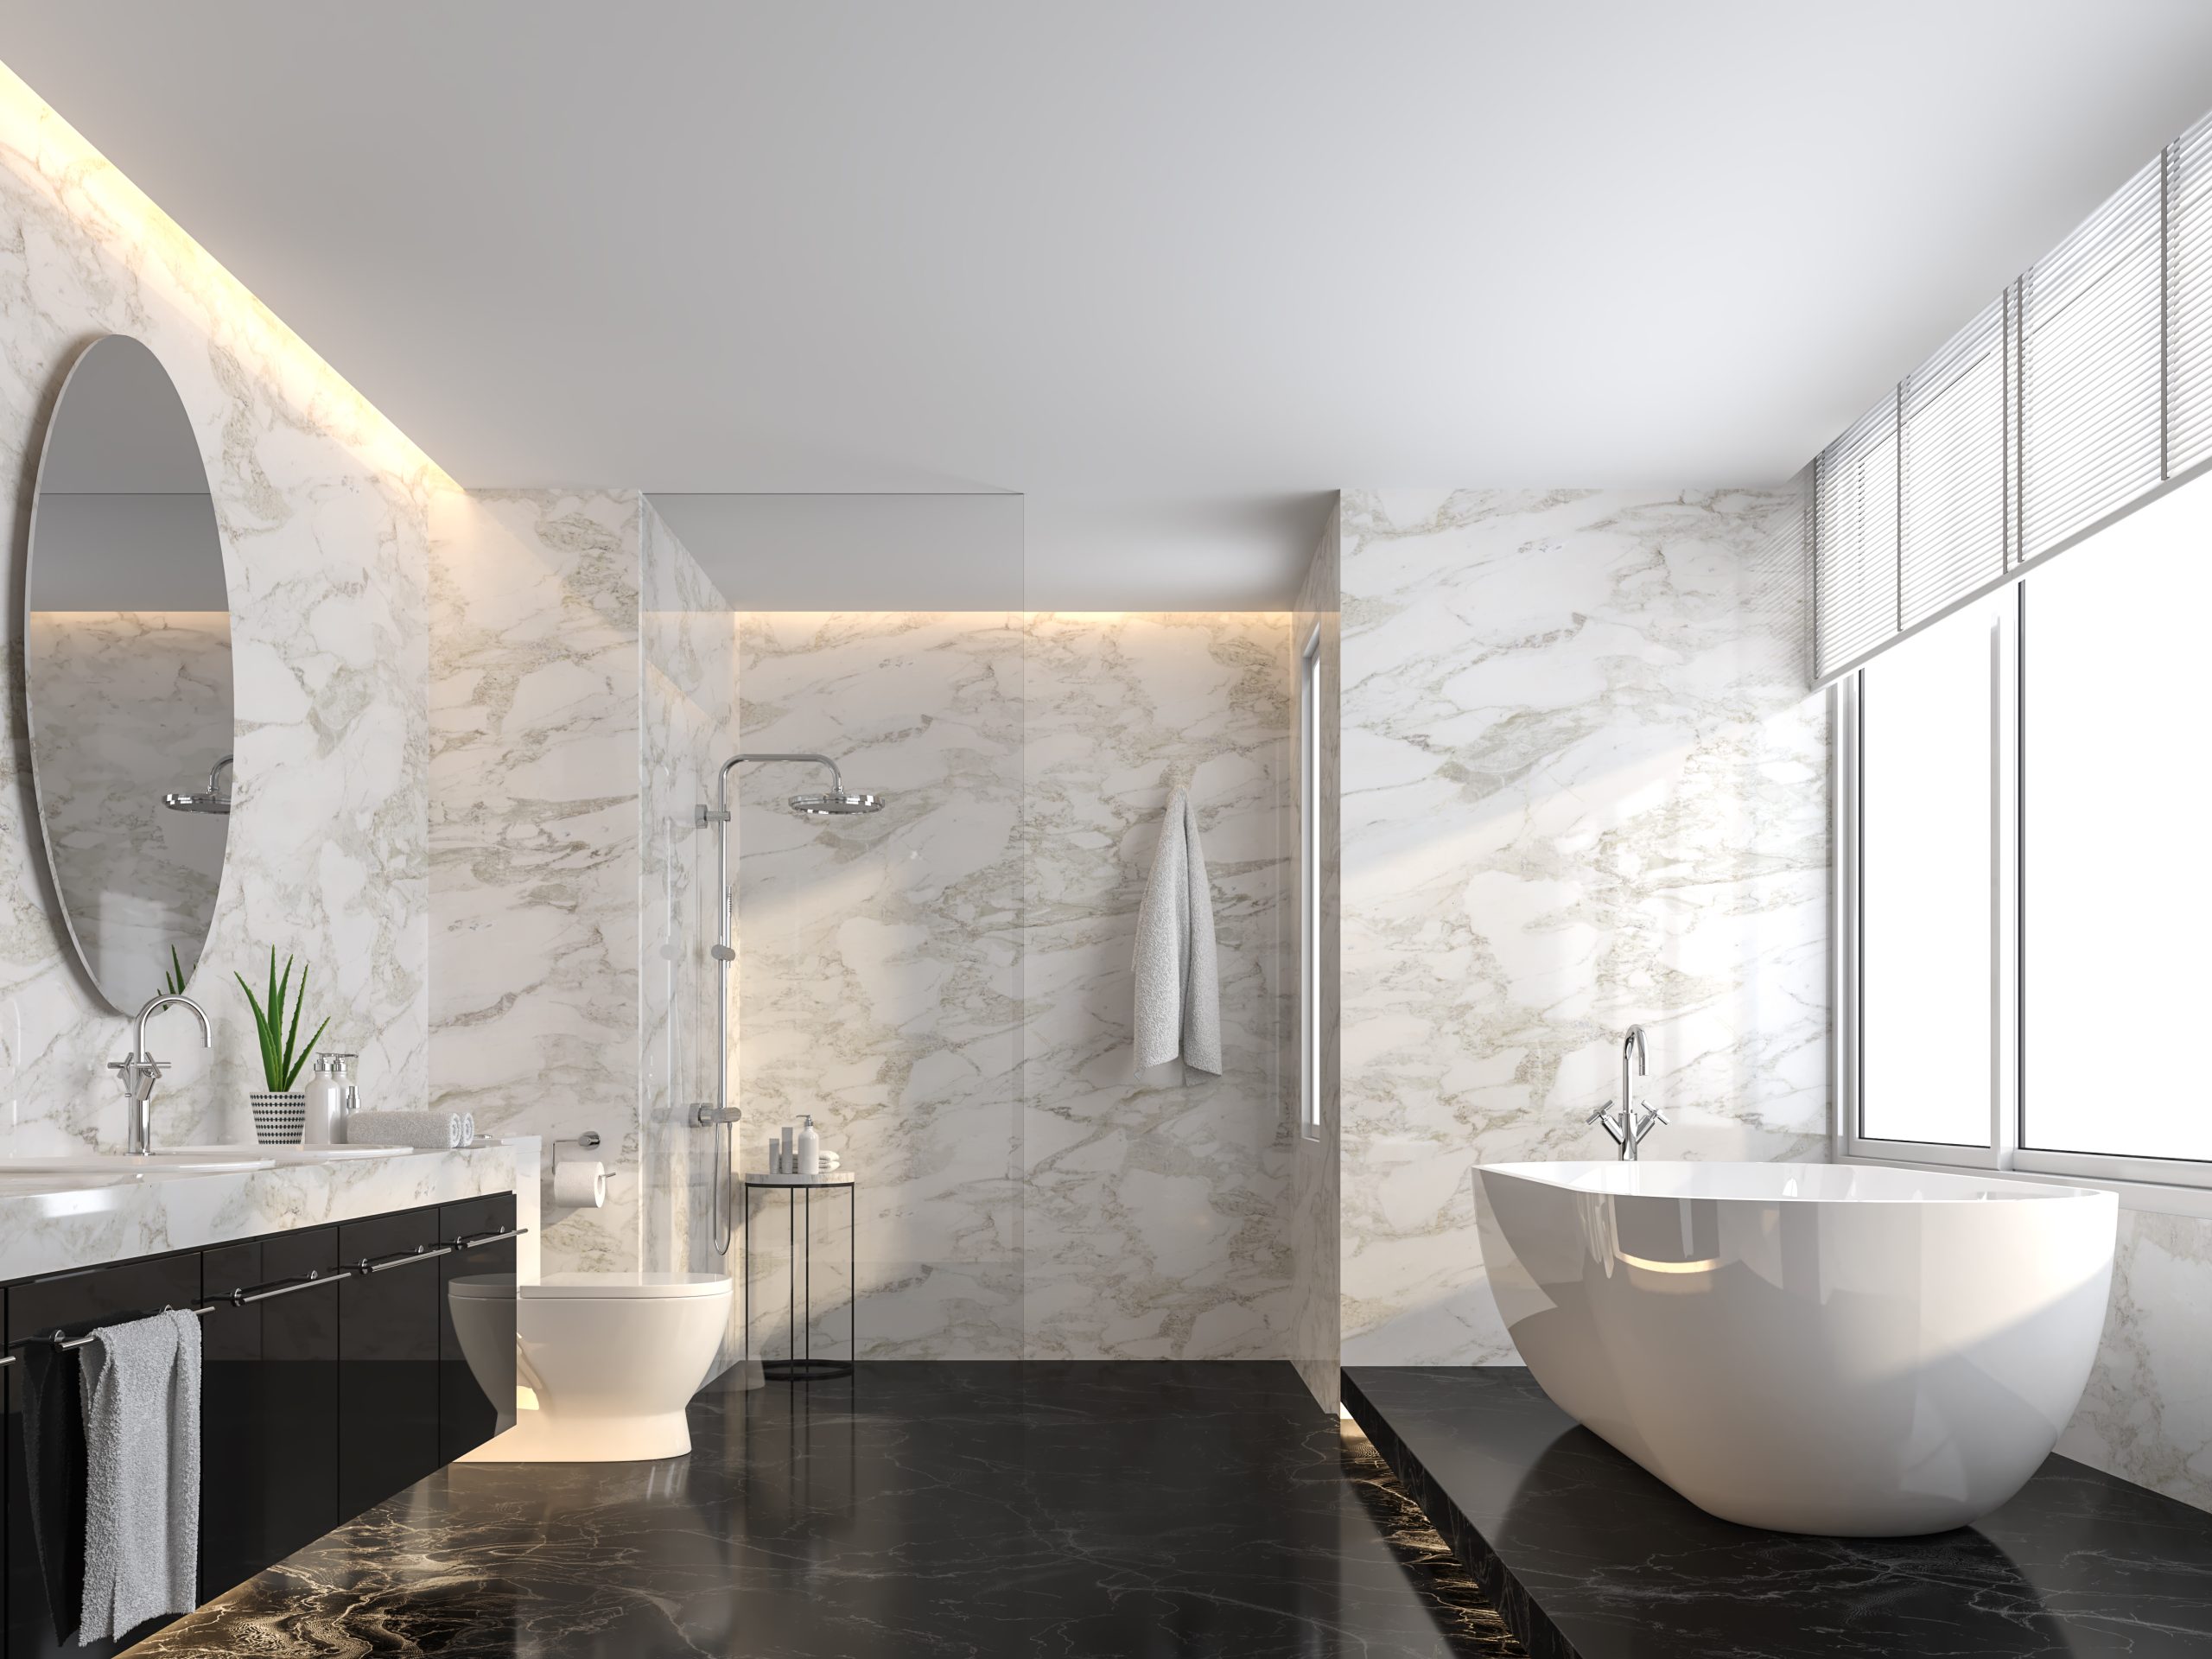 What wall panels can be used in bathrooms?